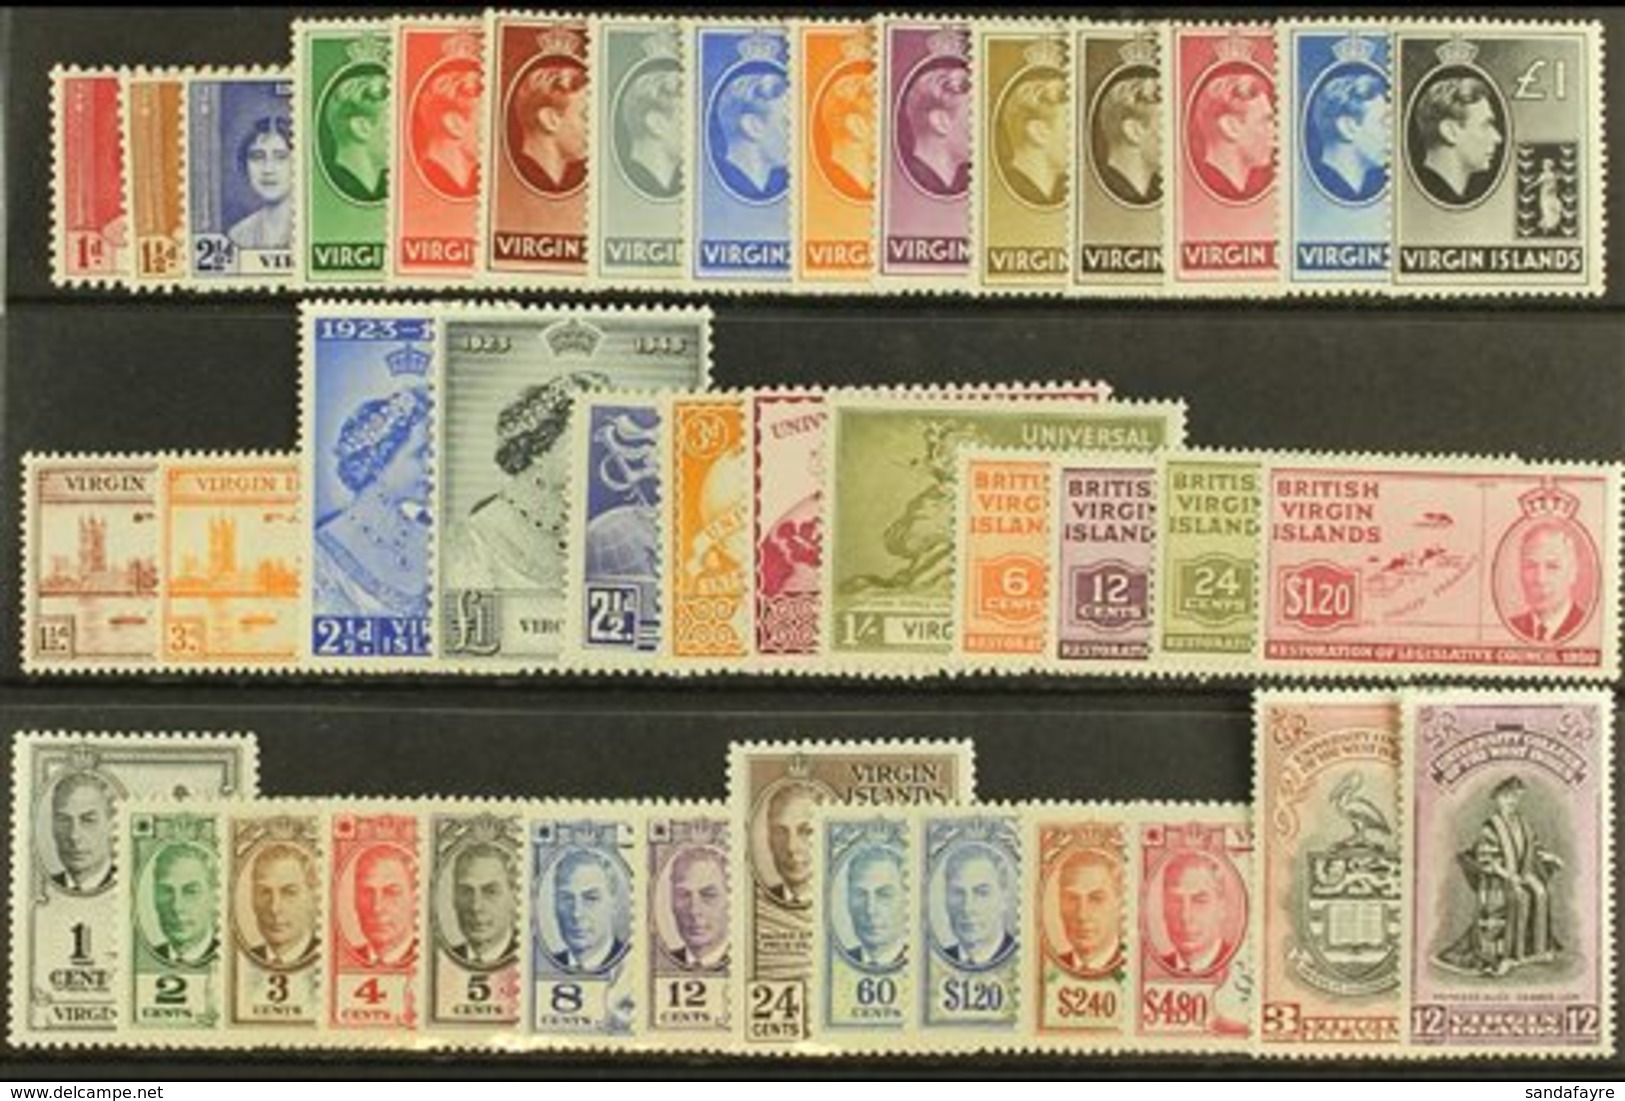 1937-52 COMPLETE MINT. A Complete "Basic" Collection Presented On A Stock Card That Runs From Coronation To The 1952 Def - Iles Vièrges Britanniques